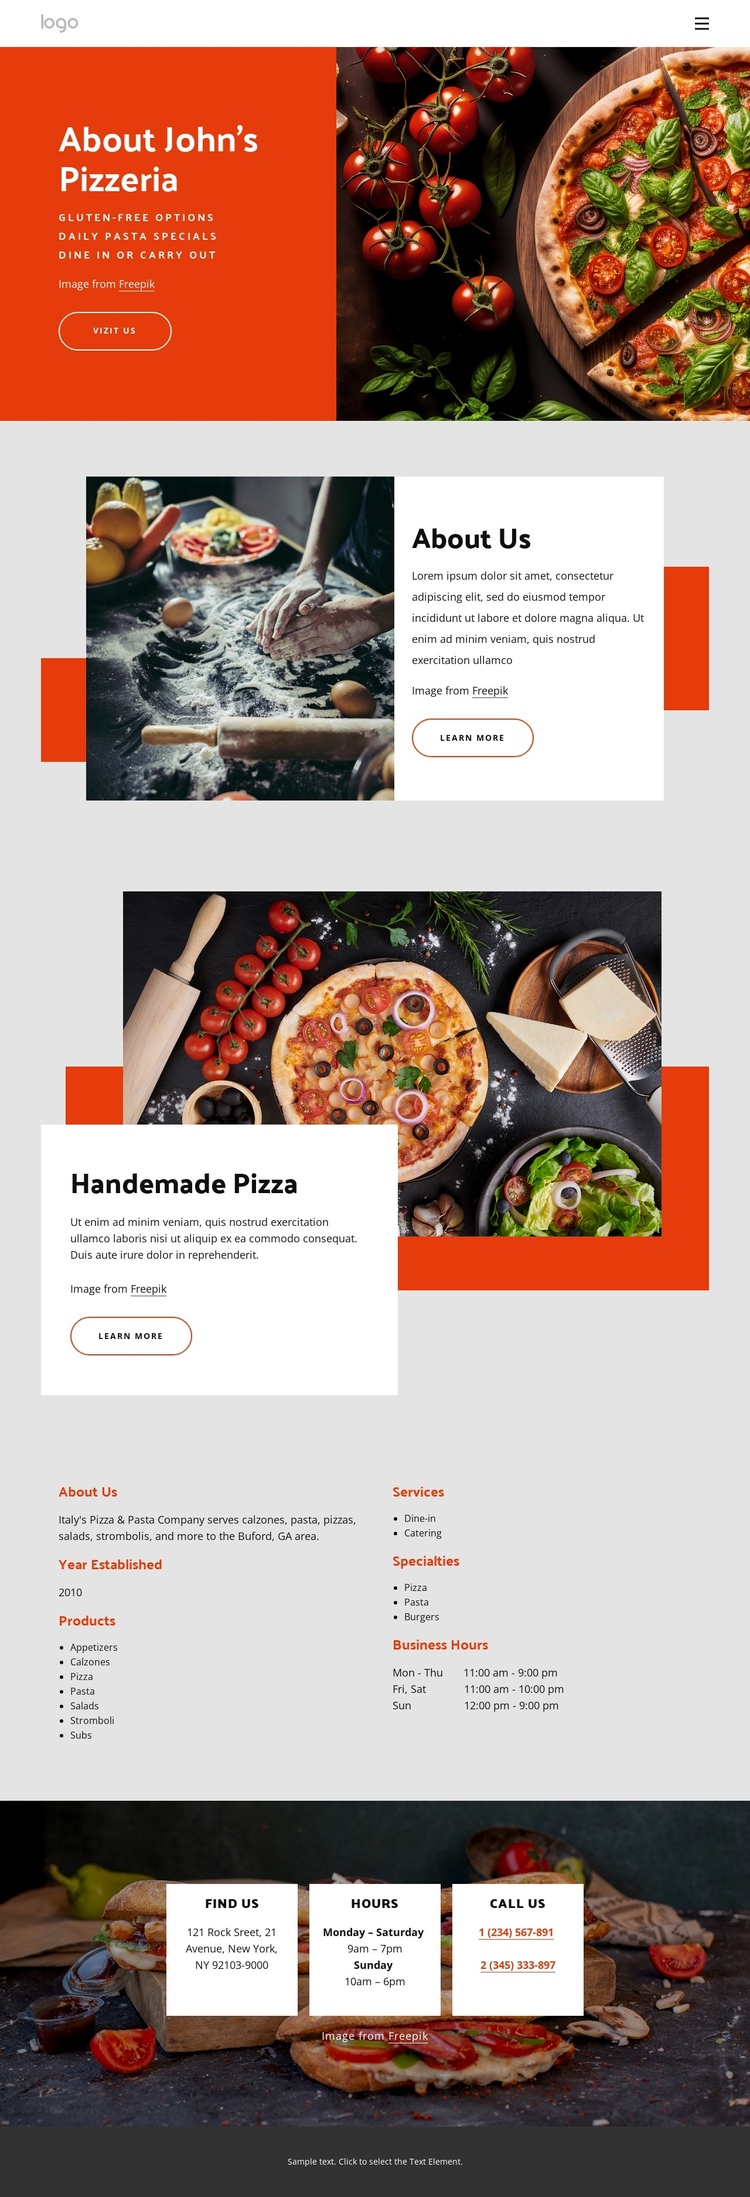 About our pizzeria Website Builder Software